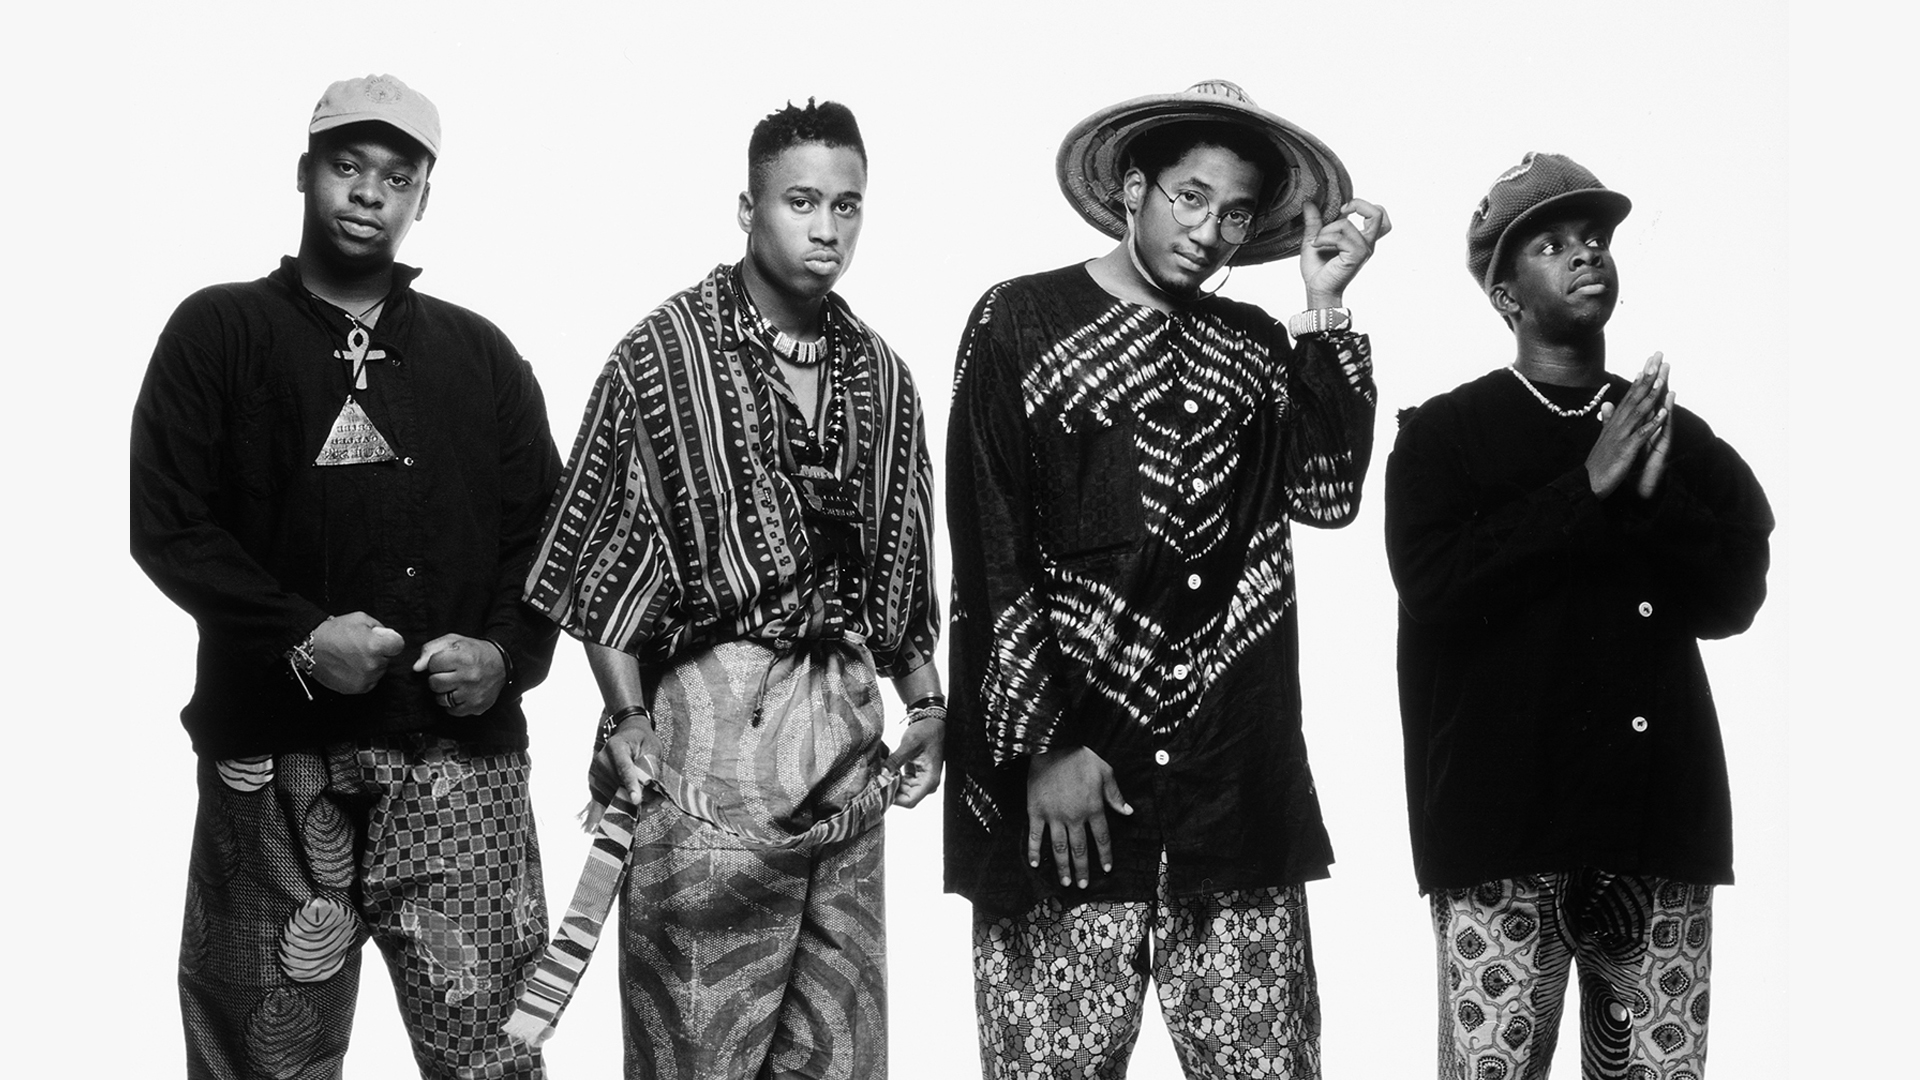 A Tribe Called Quest (left to right): Ali Shaheed Muhammad, Jarobi White, Q-Tip and Phife Dawg © Aristos Marcopoulos